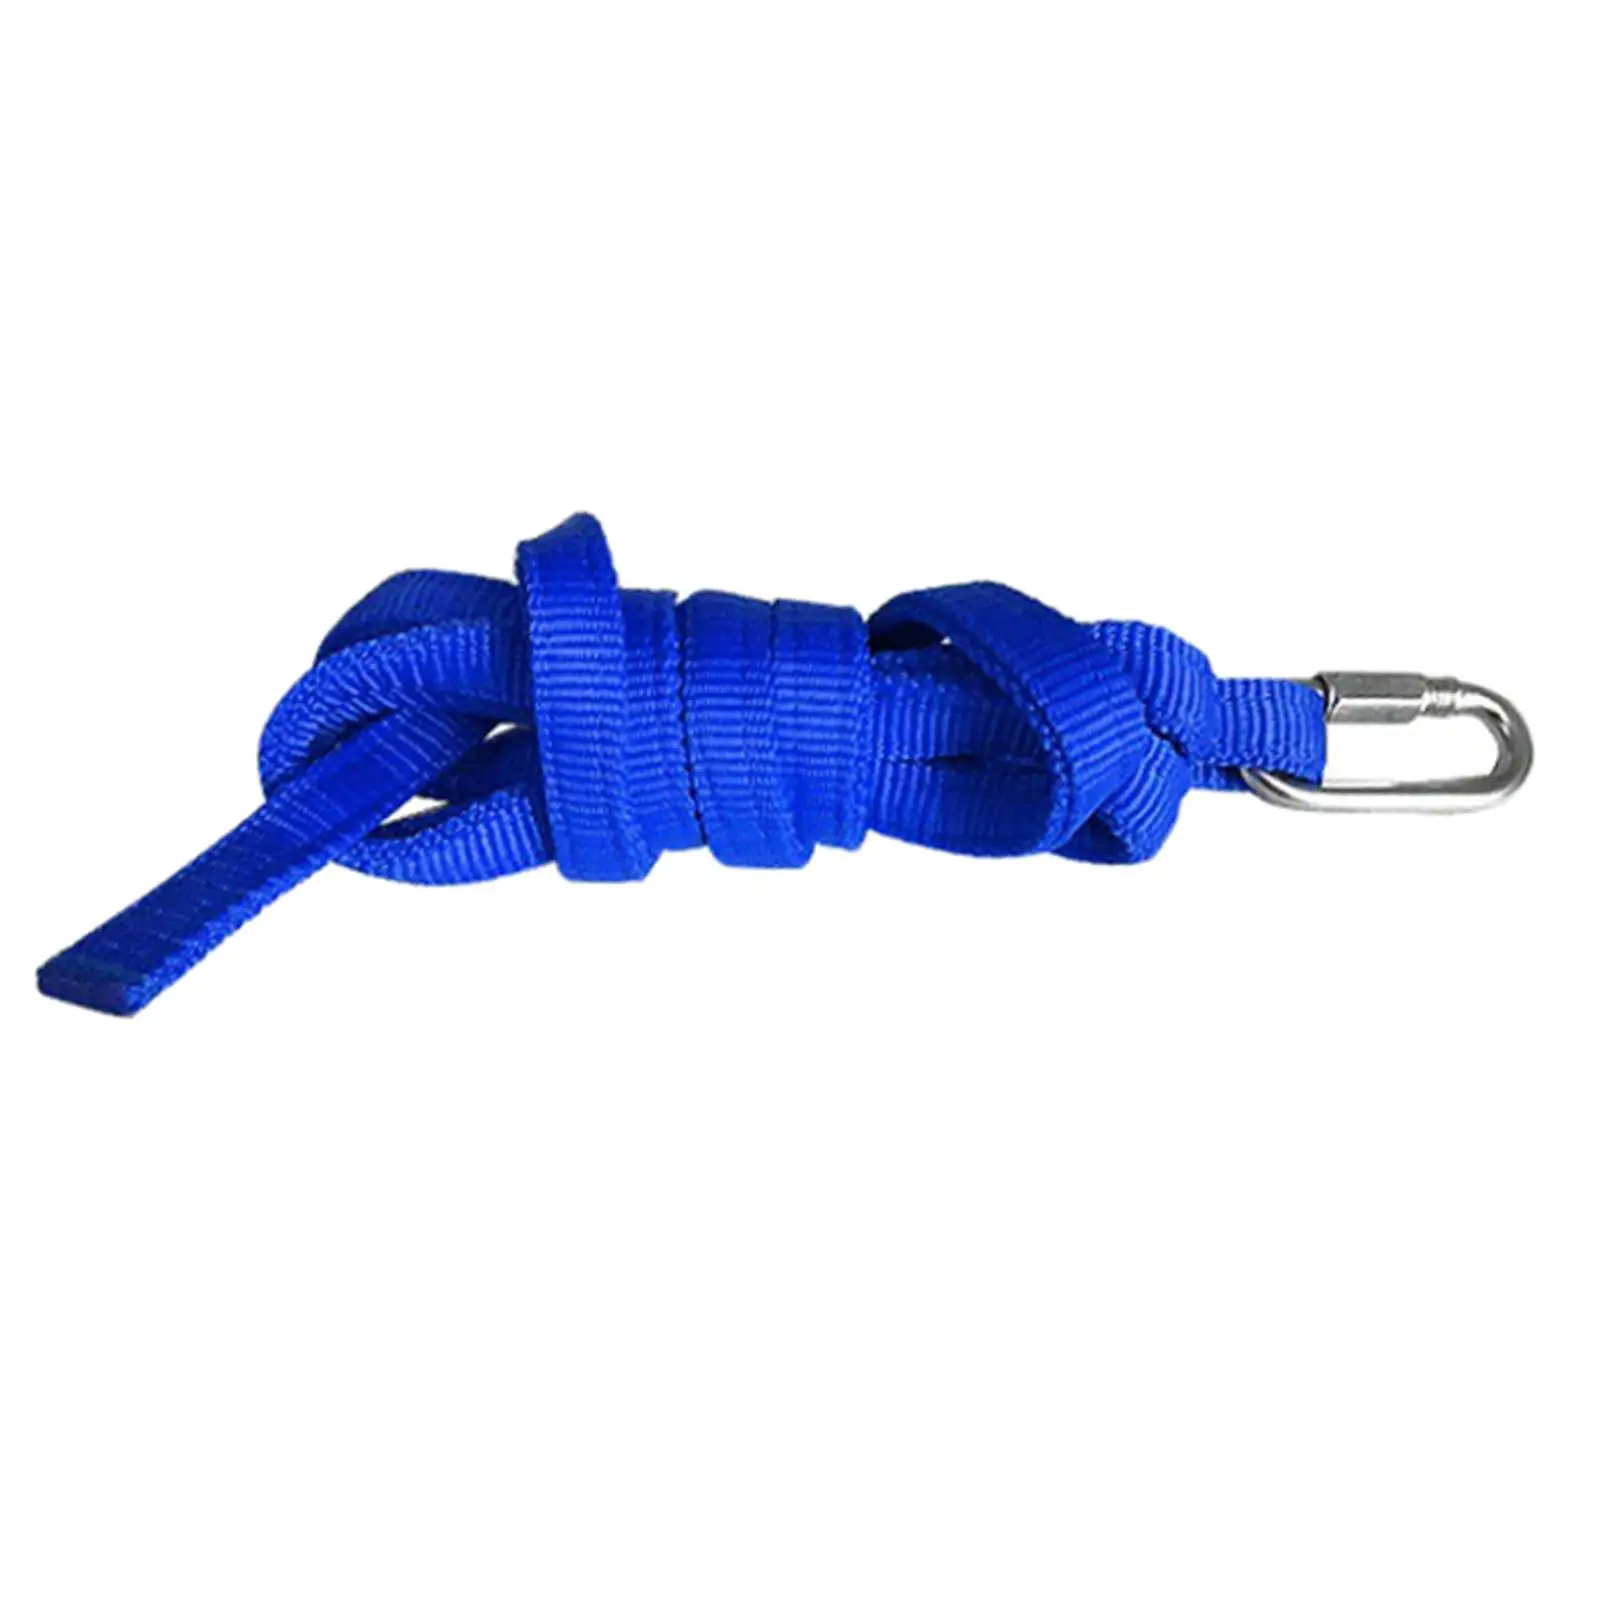 Practical Horse Lead Rope Brass Bolt snap for Leading Training Horse, Goats or Sheep Accessory Heavy Duty Webbing